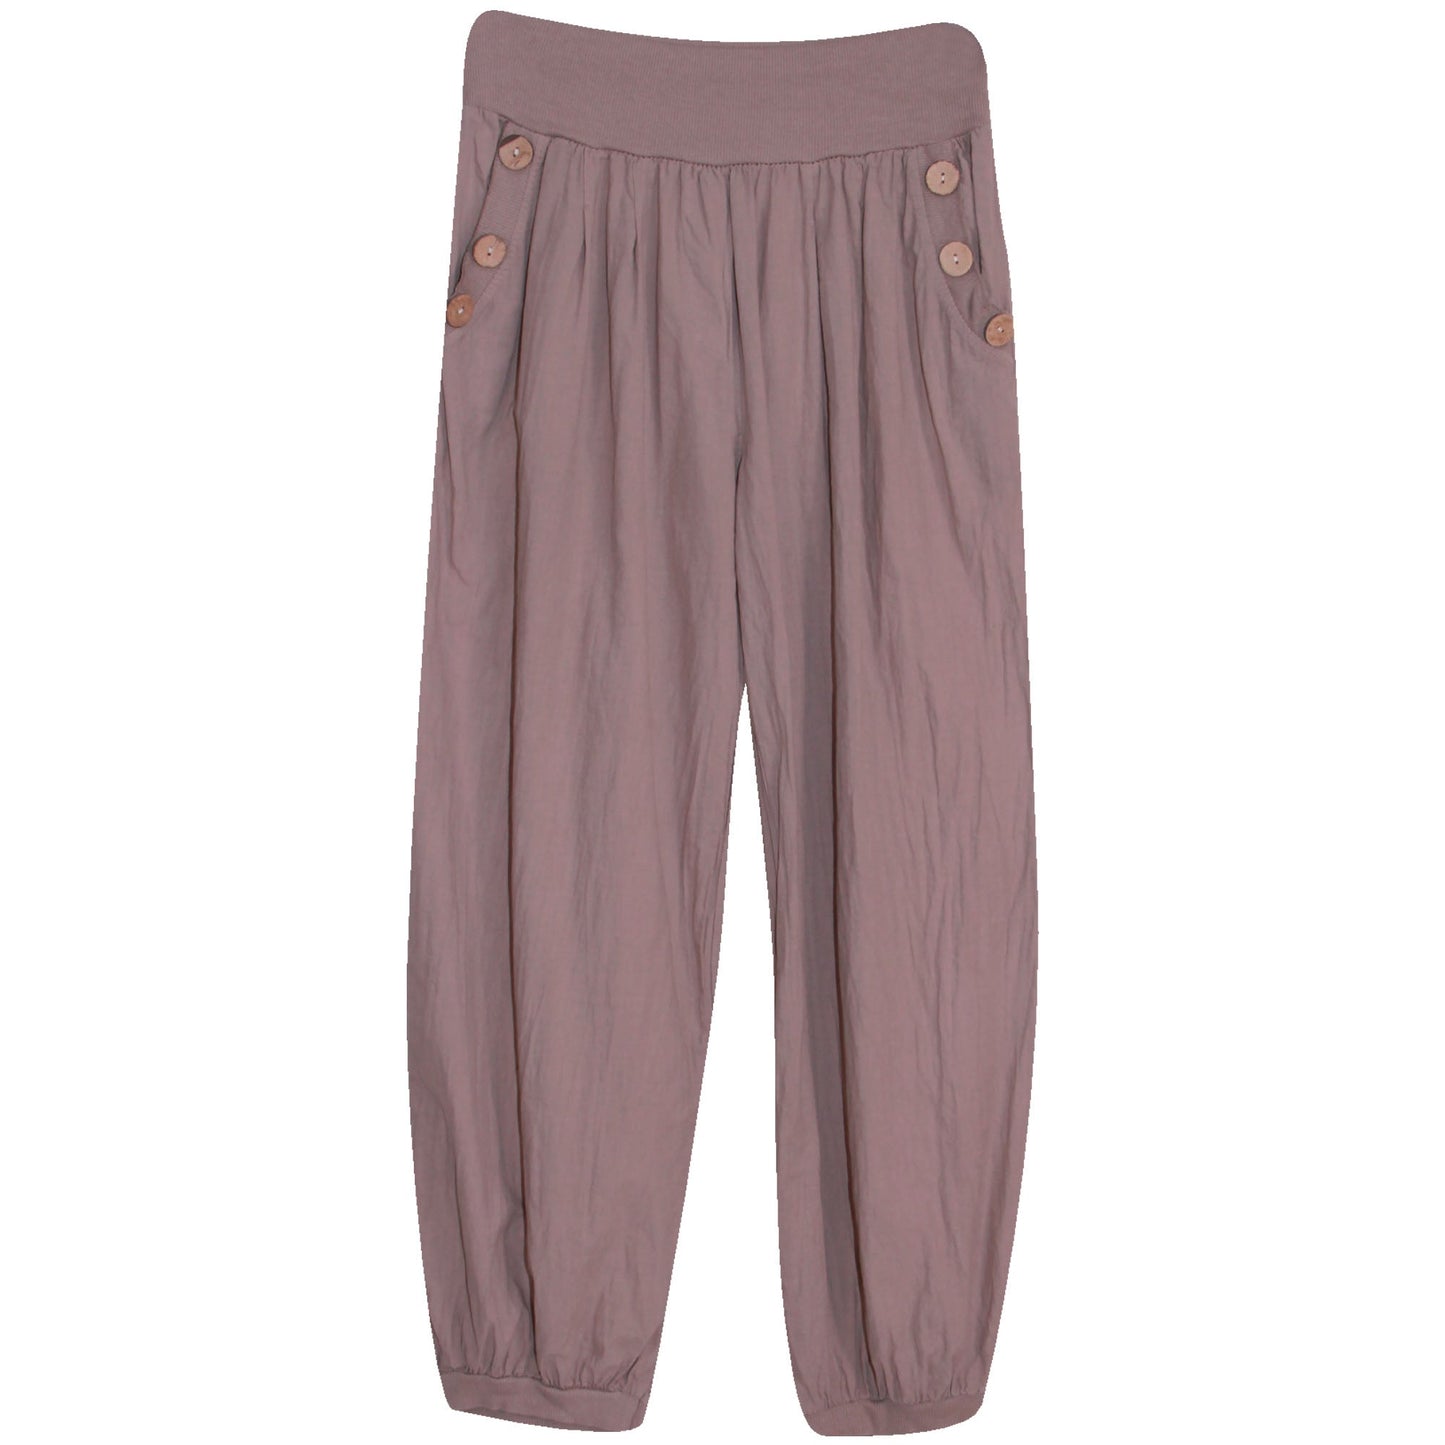 Women's Cotton Hareem Trousers Plus Size : Elasticated Waist with Wood Button Detail